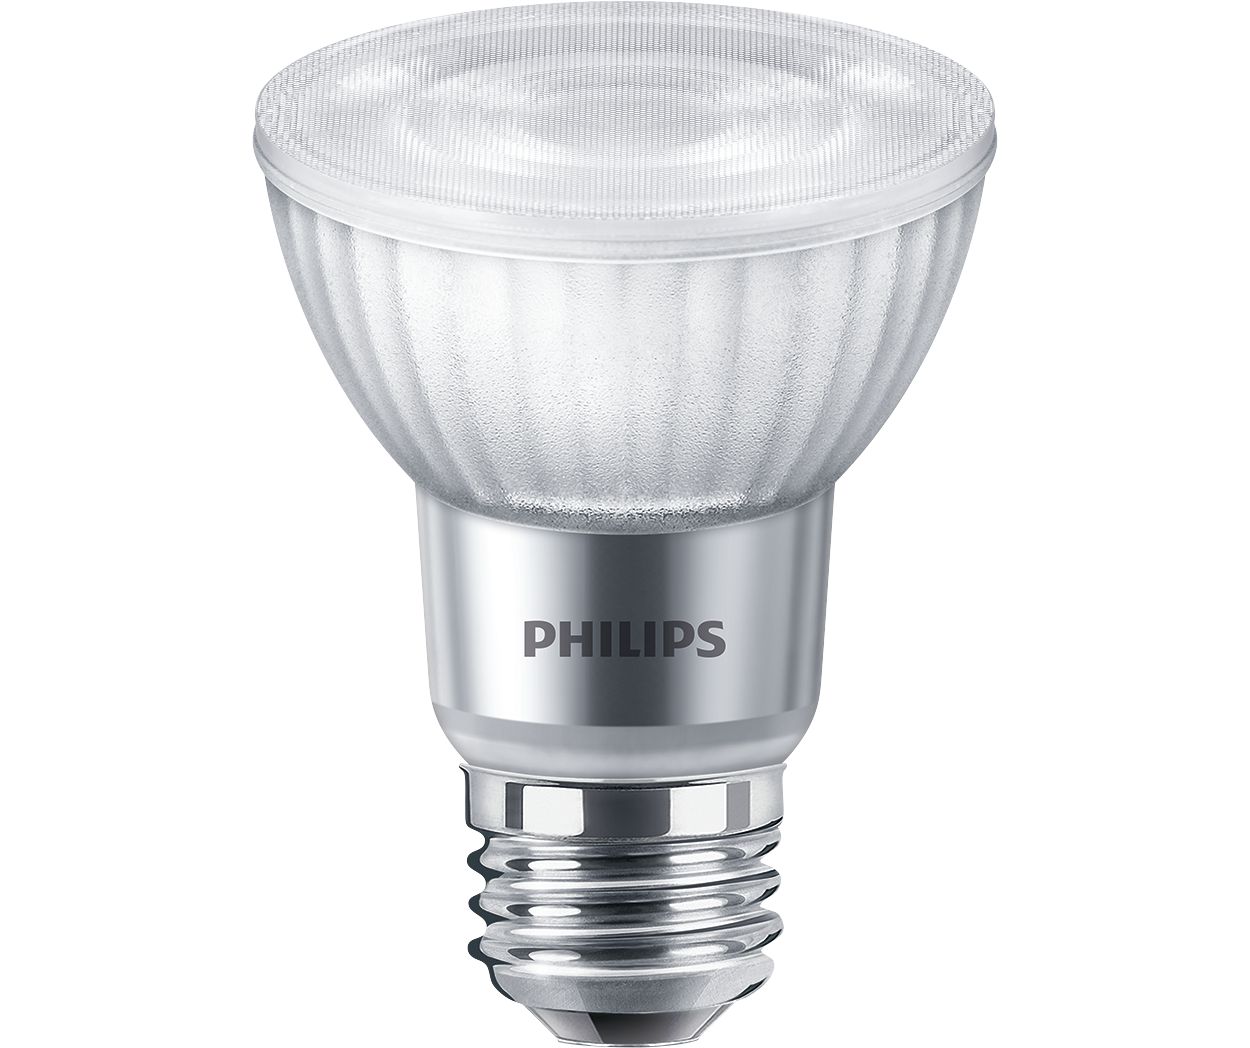 Dimmable LED spot with excellent light quality